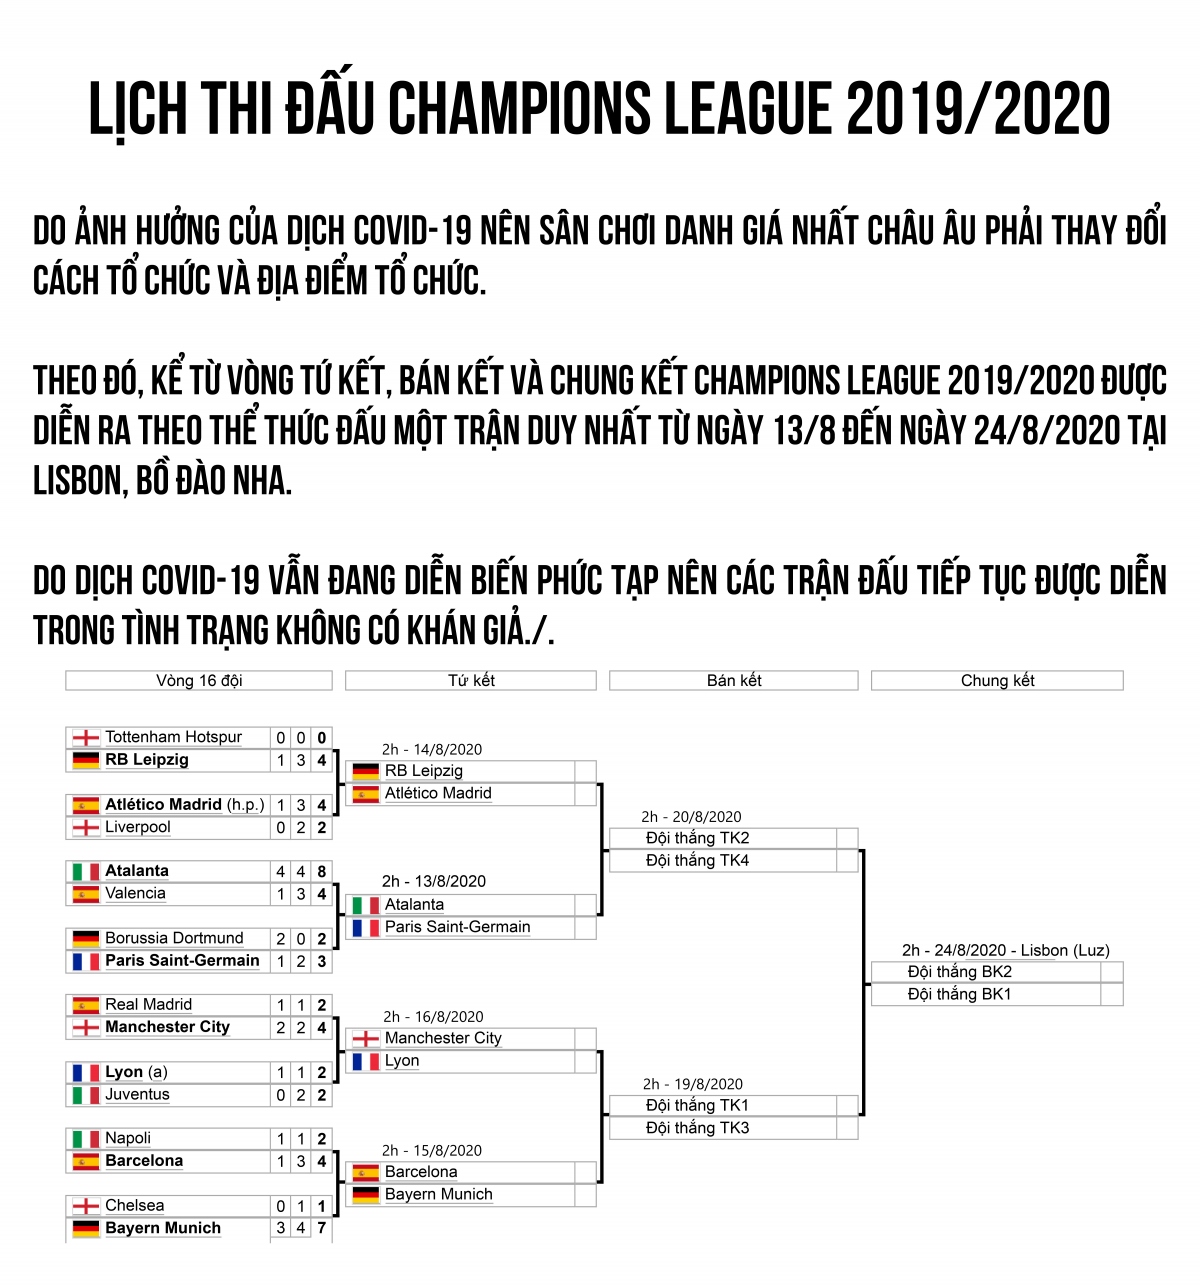 infographics lich thi dau champions league 2019 2020 theo the thuc moi hinh anh 1